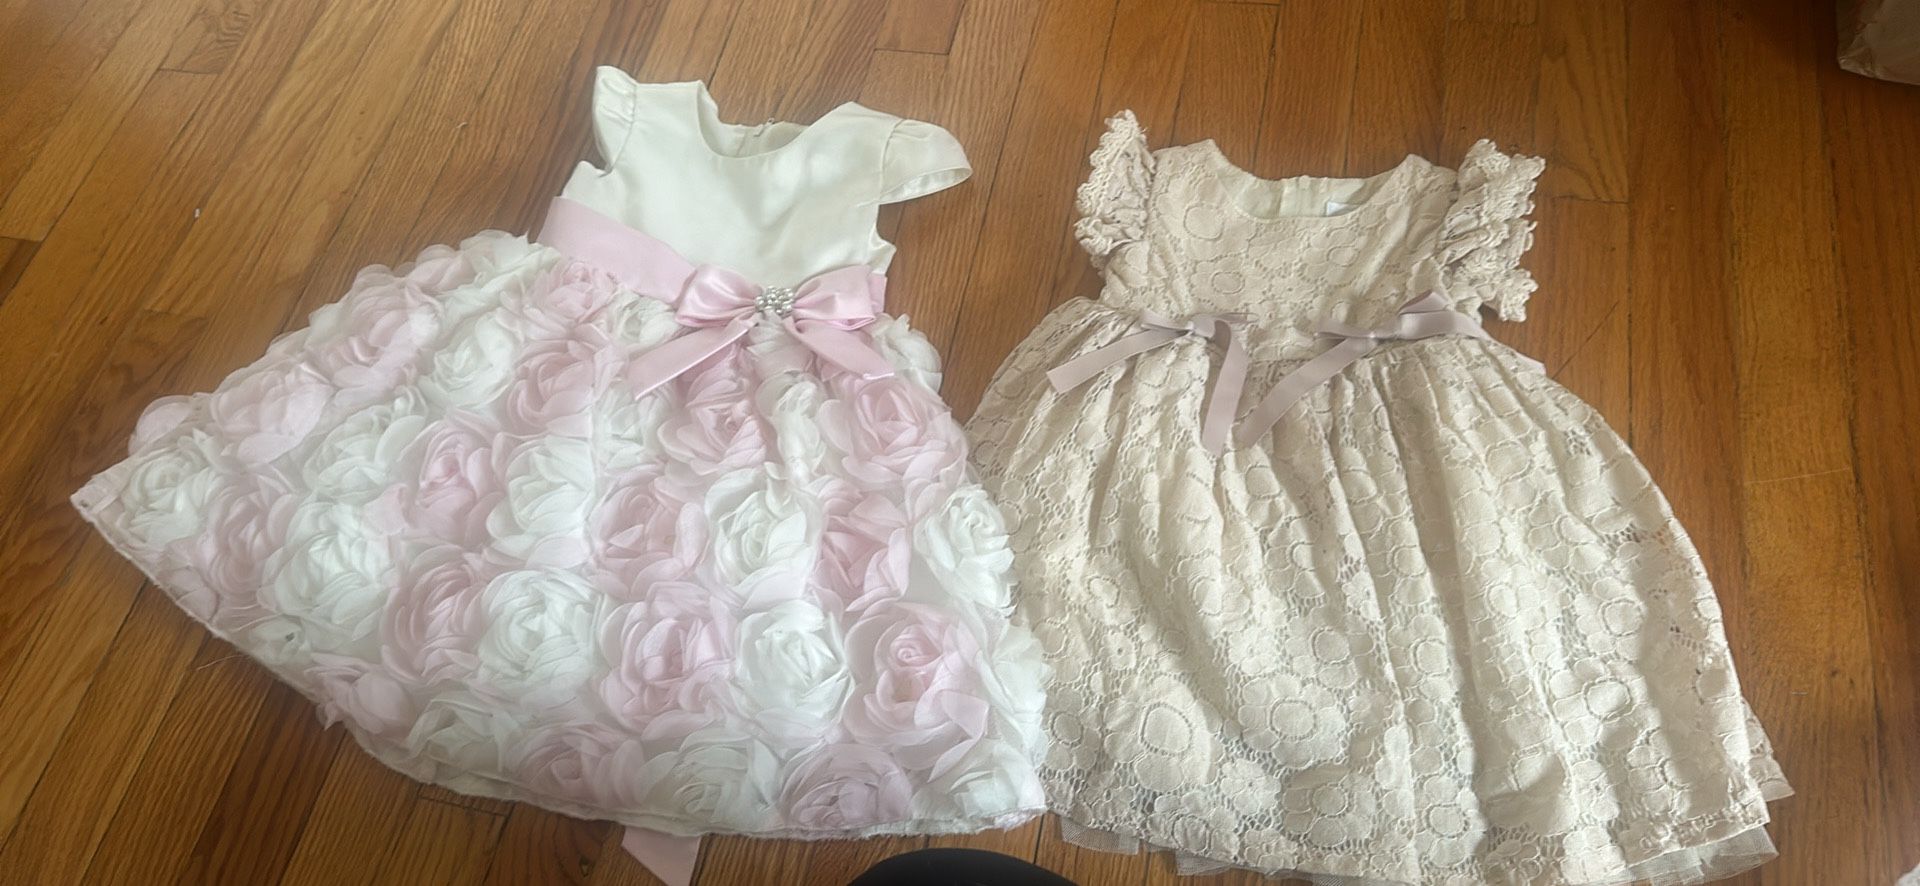 Flower Girl Dresses Size 2t And 24m